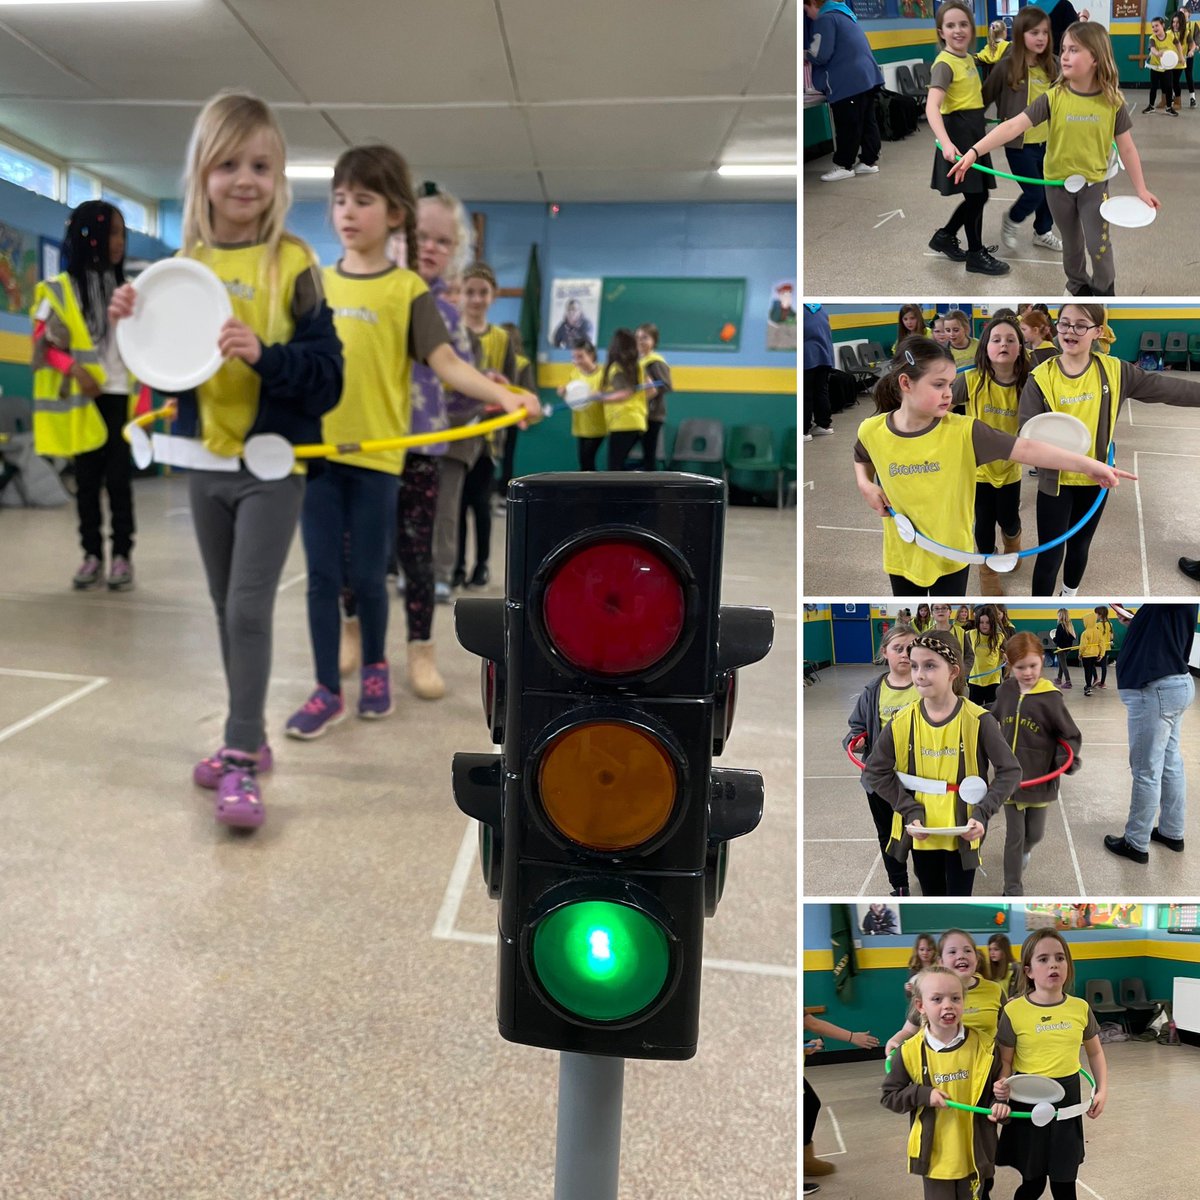 Toot toot! Using our indicators on the road. 🚗🚙🚕🚓 #girlguiding #hernebay #brownies